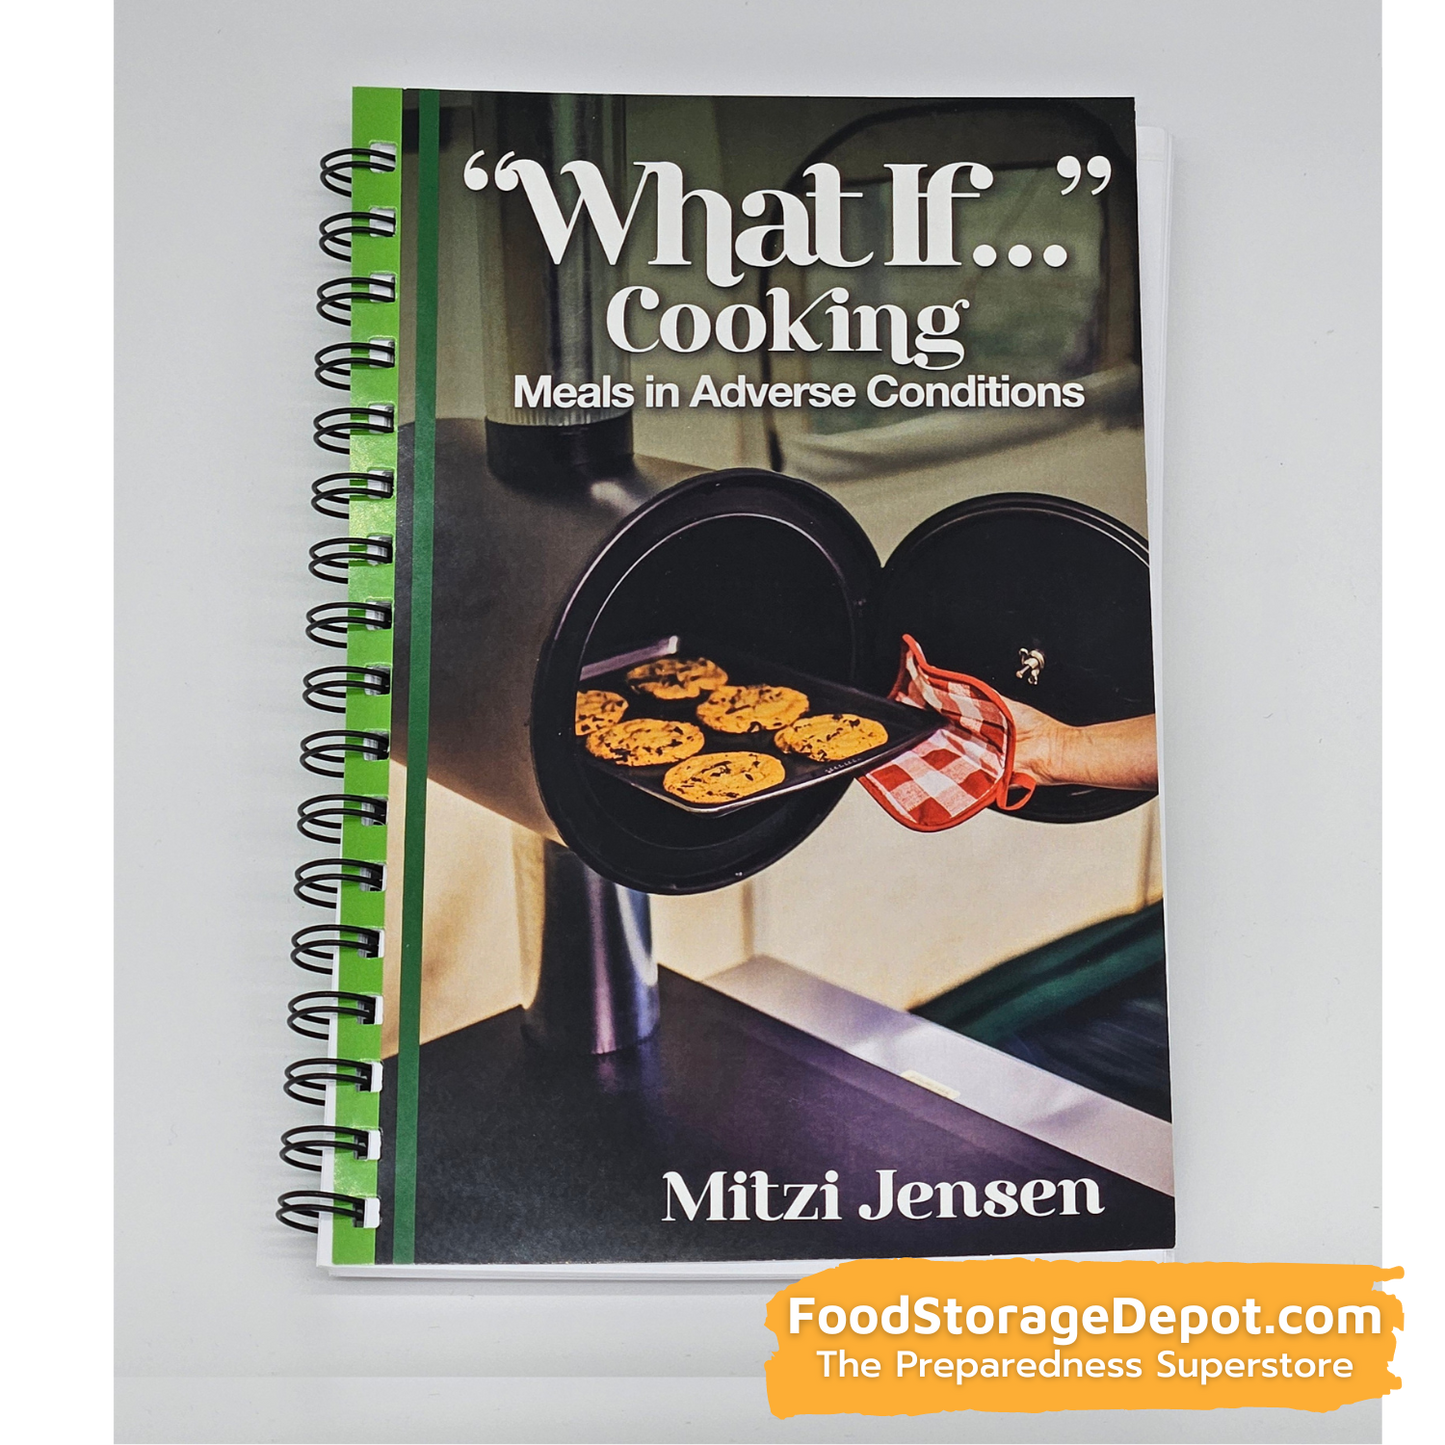 What If?---Cooking Meals in Adverse Conditions by Mitzi Jensen